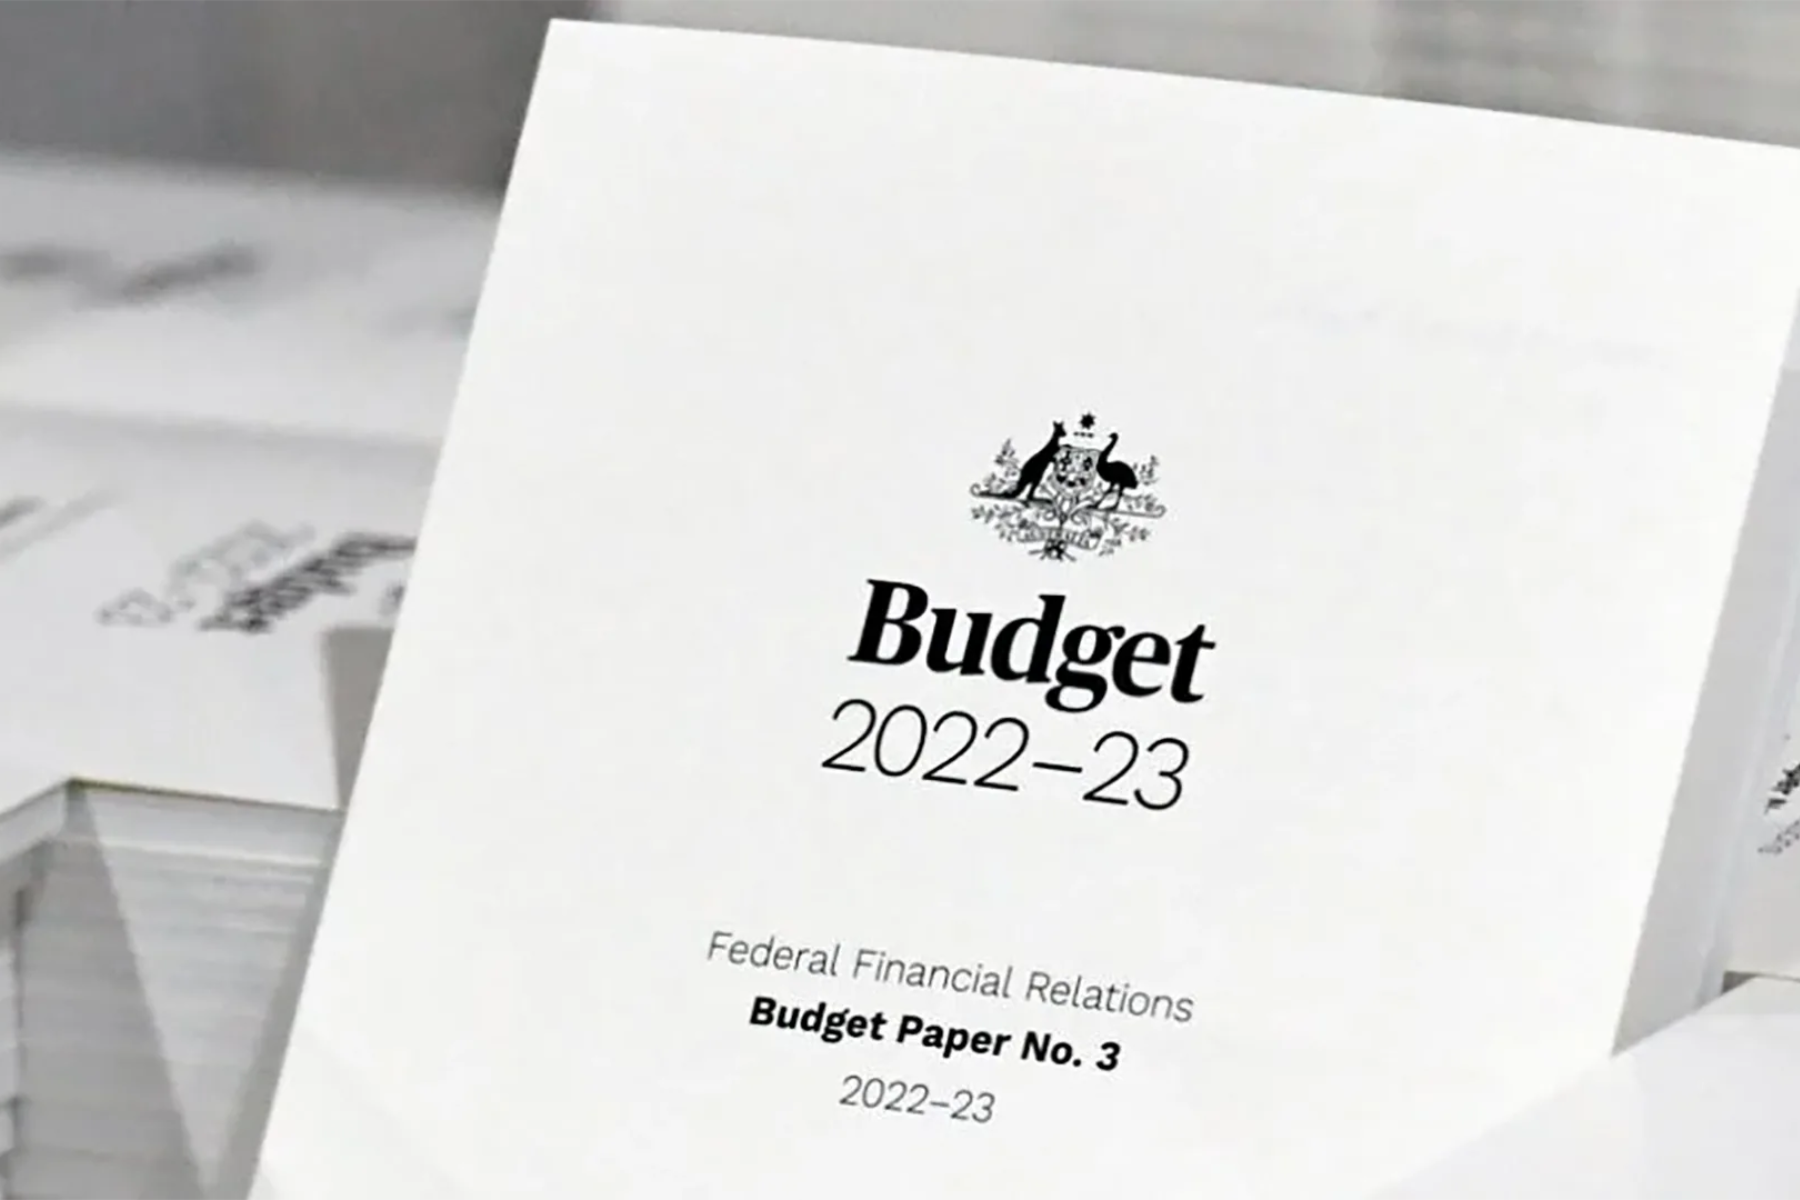 Property sector highlights from the first budget of the Albanese government.